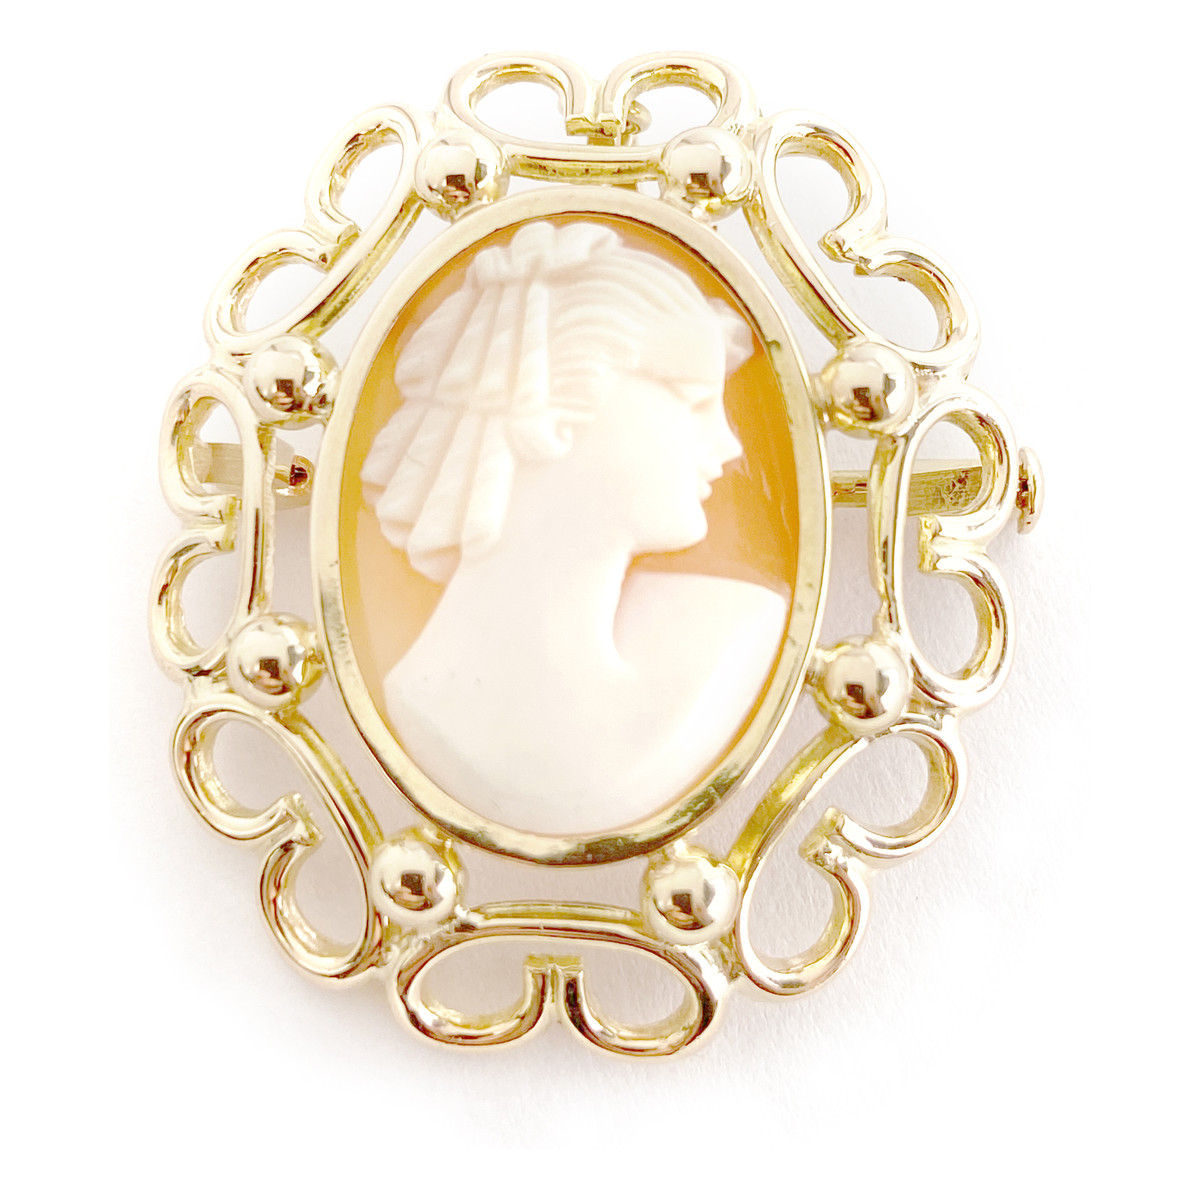 Pendentif broche d'occasion or 750 jaune camée coquille